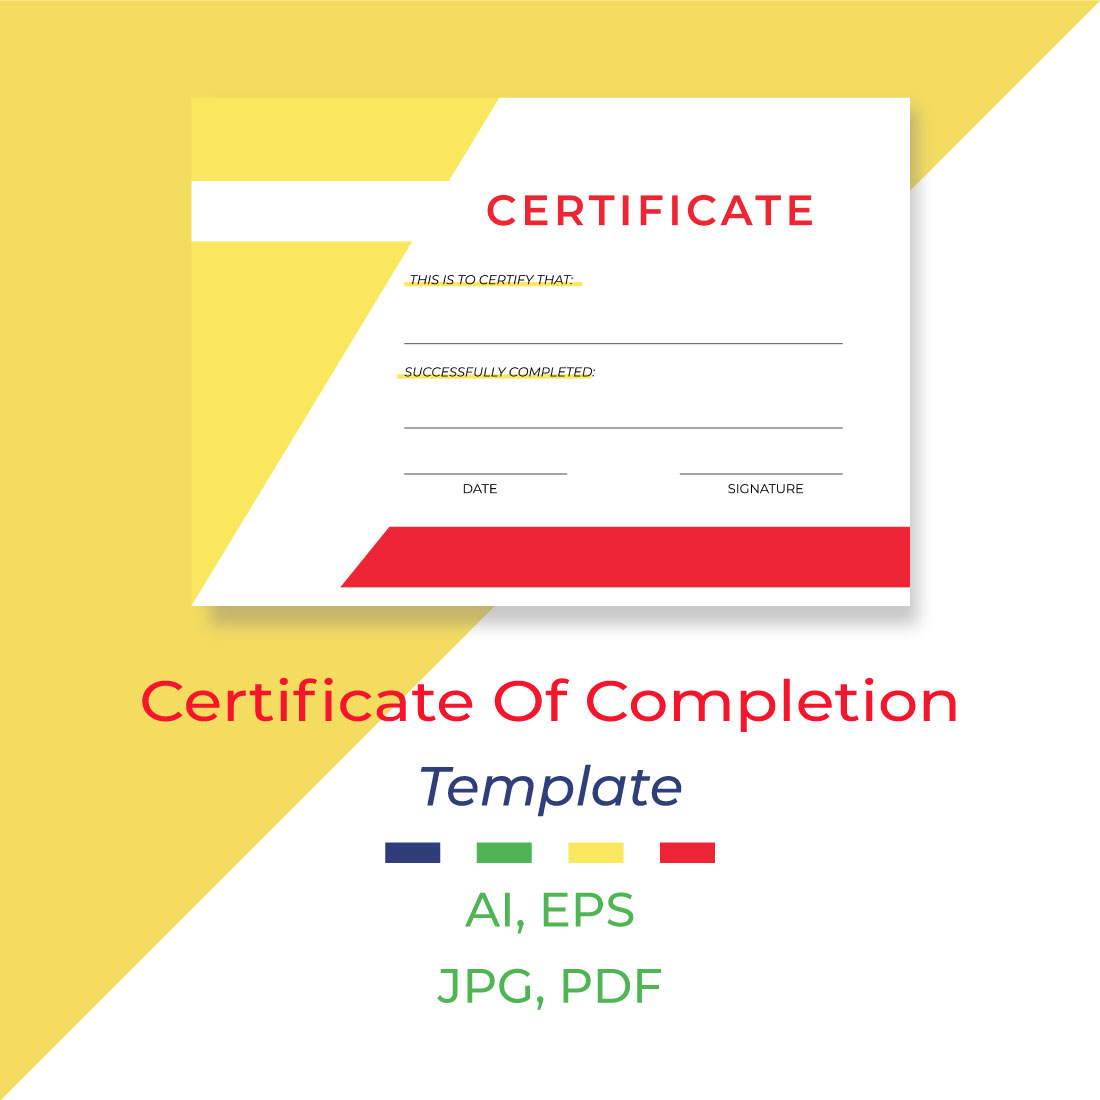 Certificate Of Completion Template Masterbundles 5361